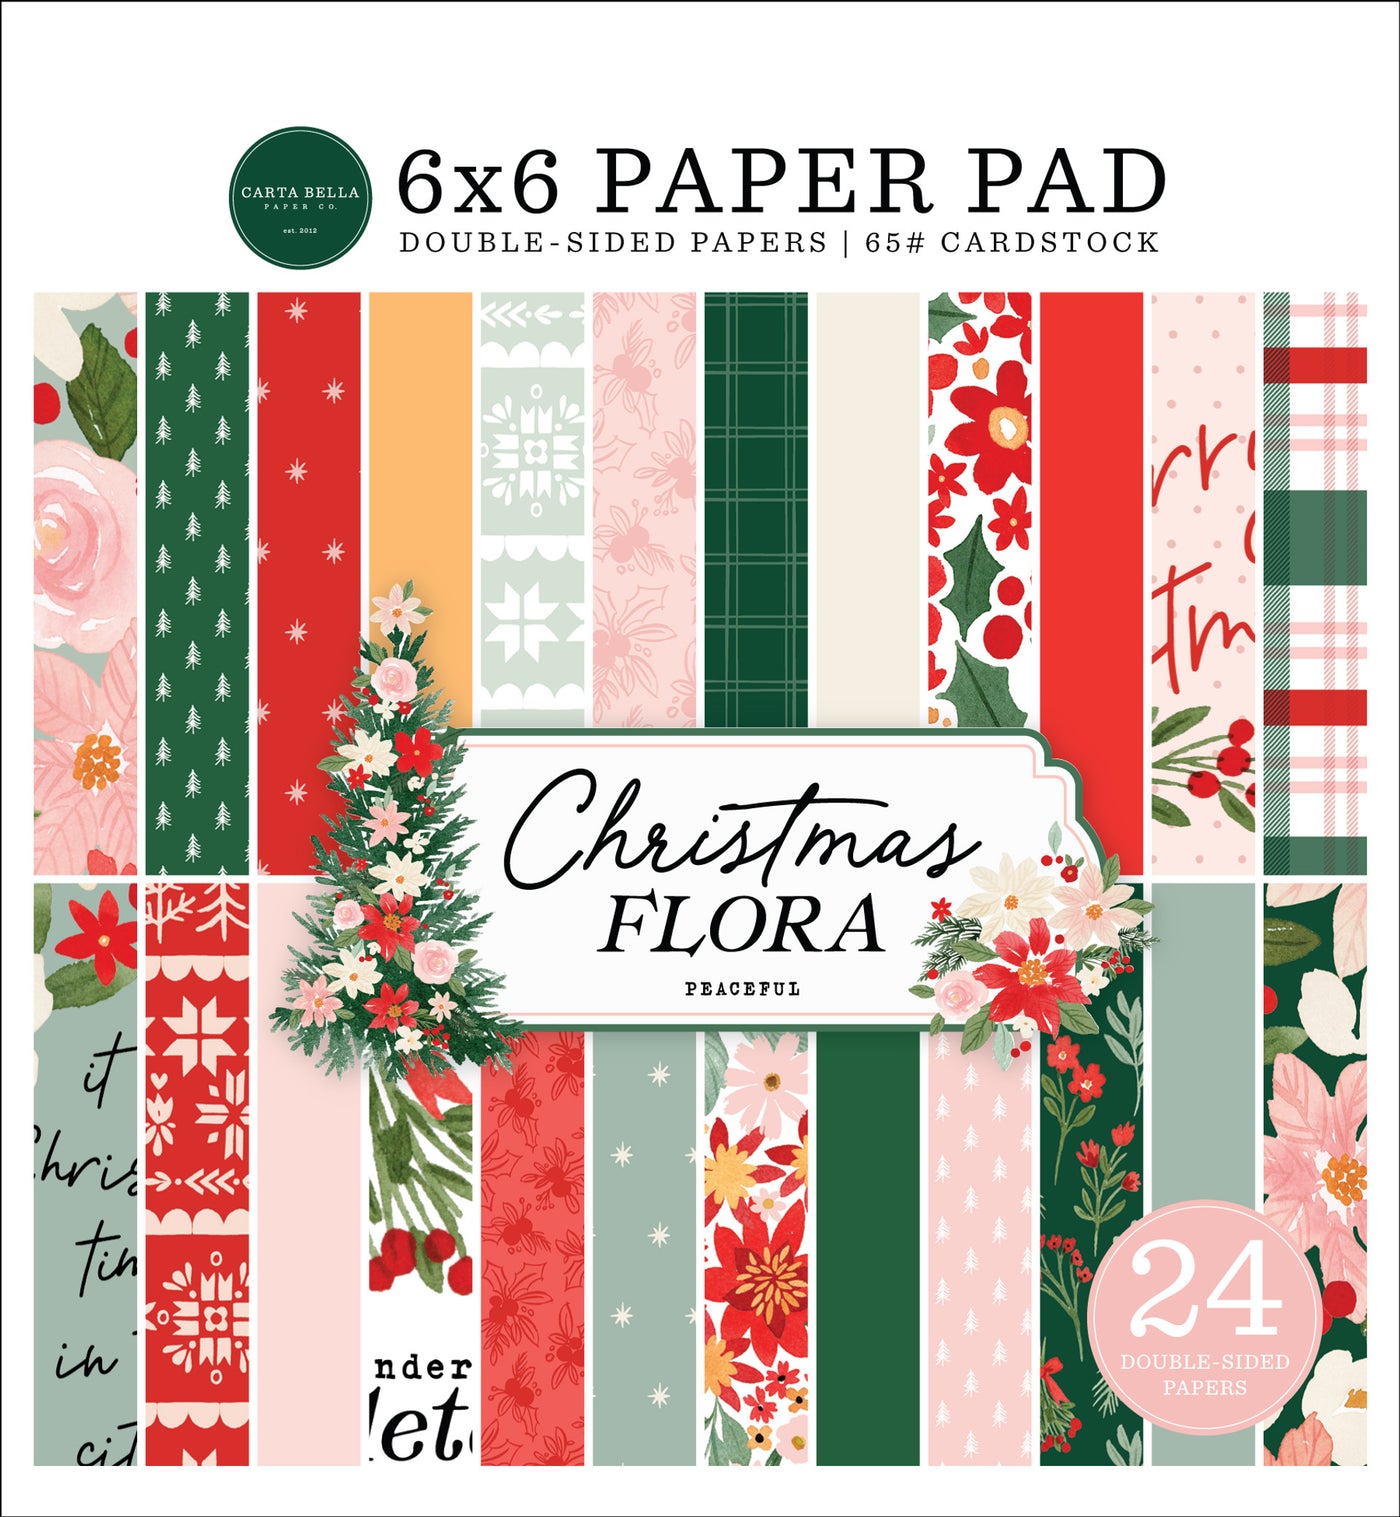 Christmas Flora is a 6x6 pad with 24 double-sided sheets. It is great for Christmas card making and other seasonal craft projects. It matches Carta Bella Merry Christmas Peaceful. 